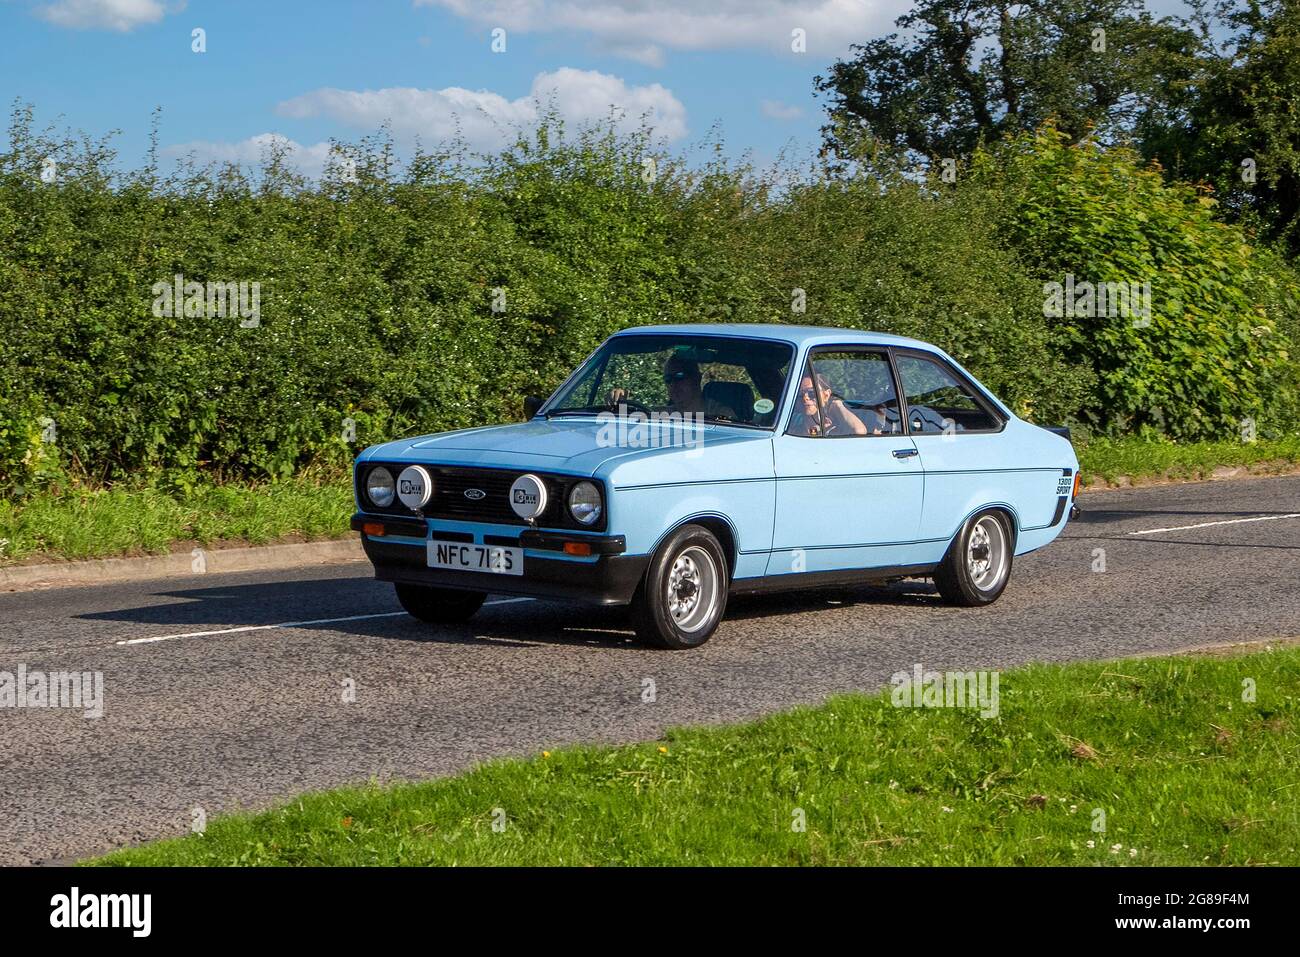 1978 70s blue Ford Escort vehicle en-route to Capesthorne Hall classic July car show, Cheshire, UK Stock Photo